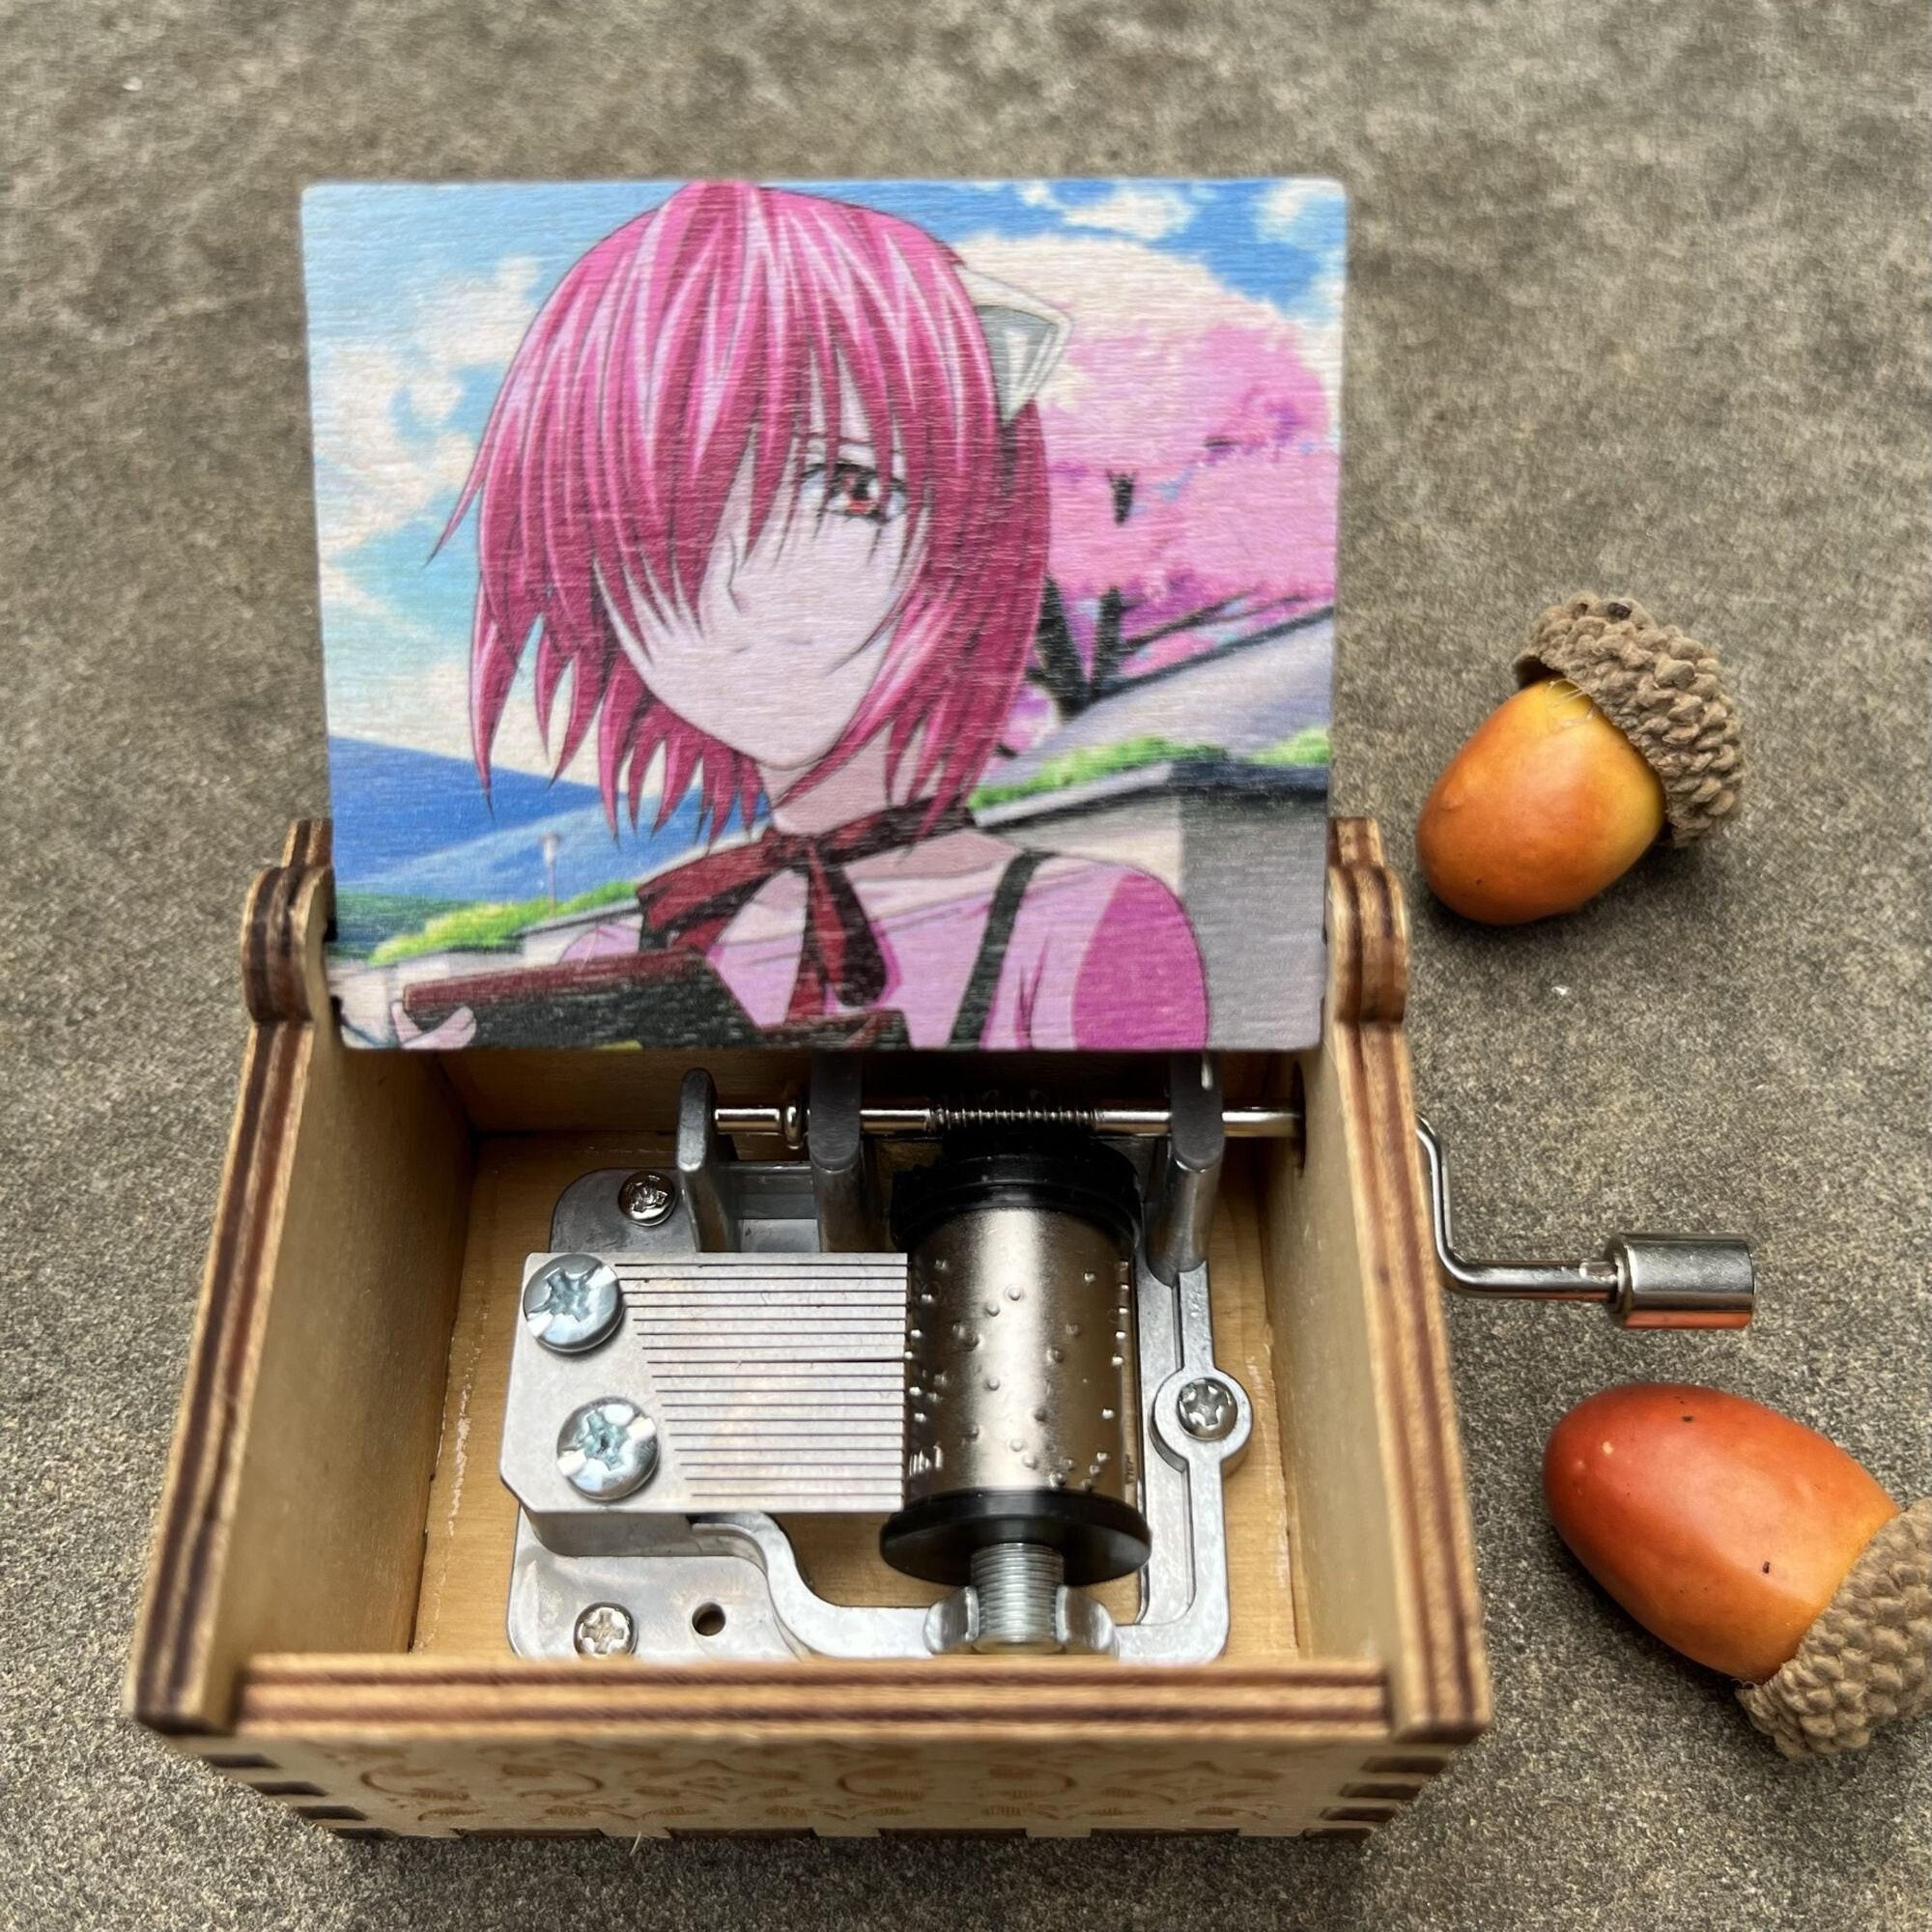 Color Print Anime Song Lilium Elfen Lied Music Box Wooden Black Hand  Movement Girls For Girlfriend Wife Friend Christmas Kid Toy - AliExpress